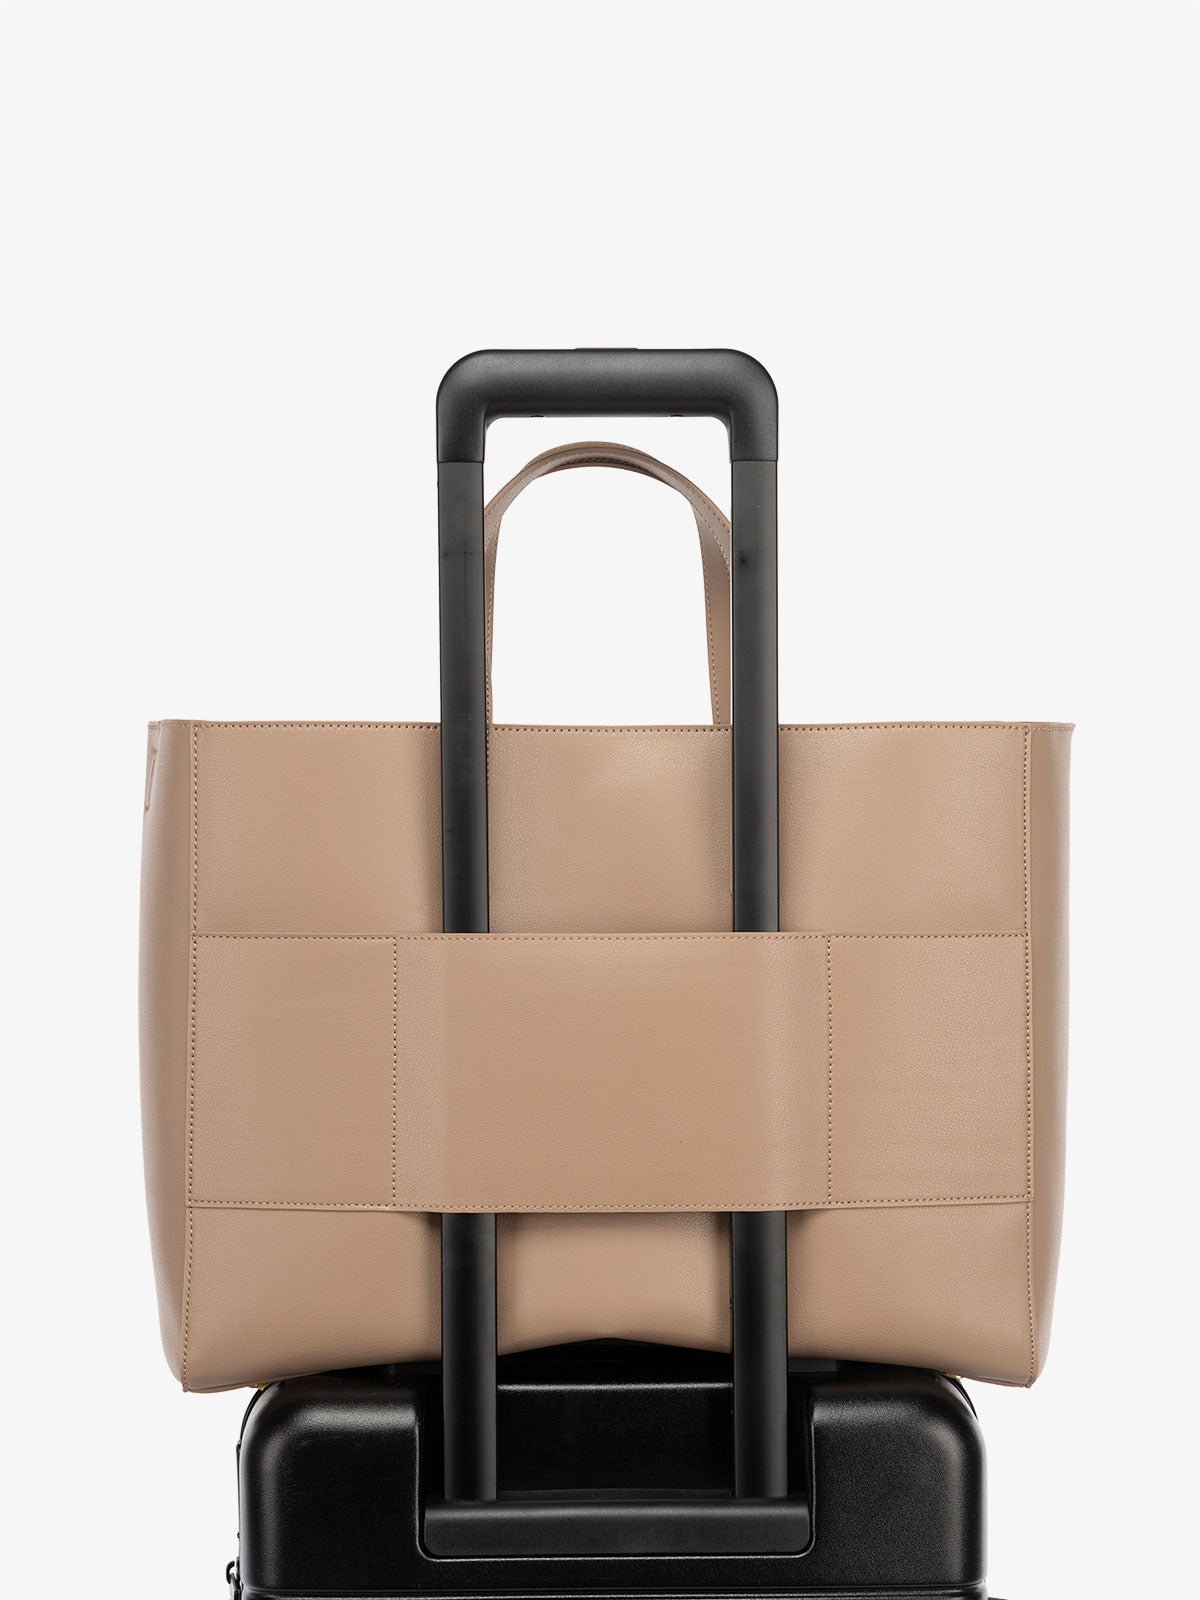 CALPAK Haven tote bag with laptop compartment and trolley sleeve in taupe